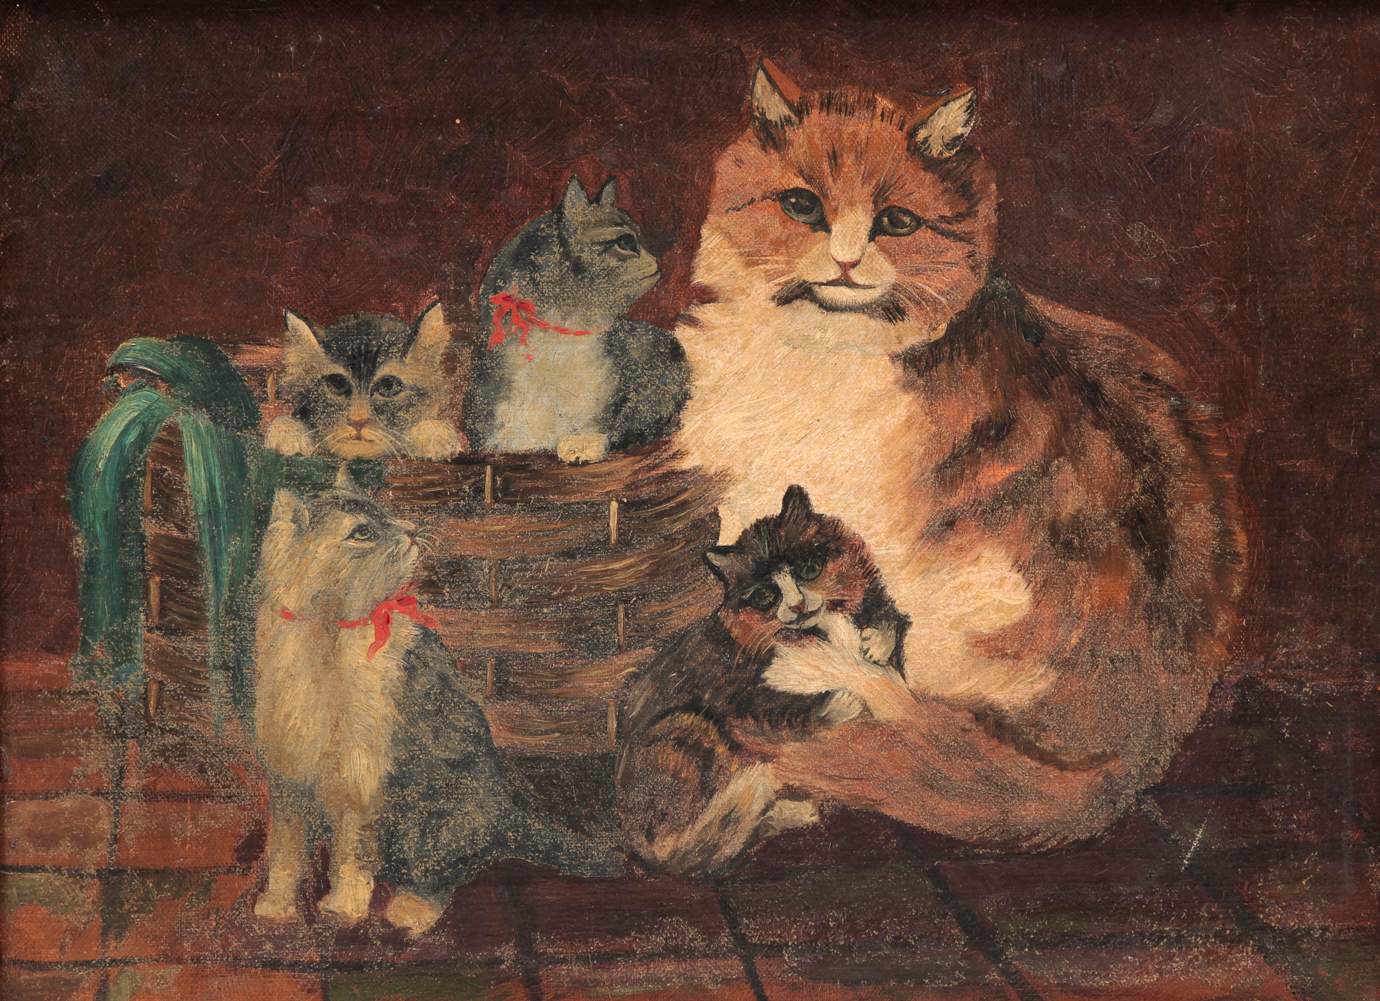 AMERICAN OIL ON CANVAS OF CATS.